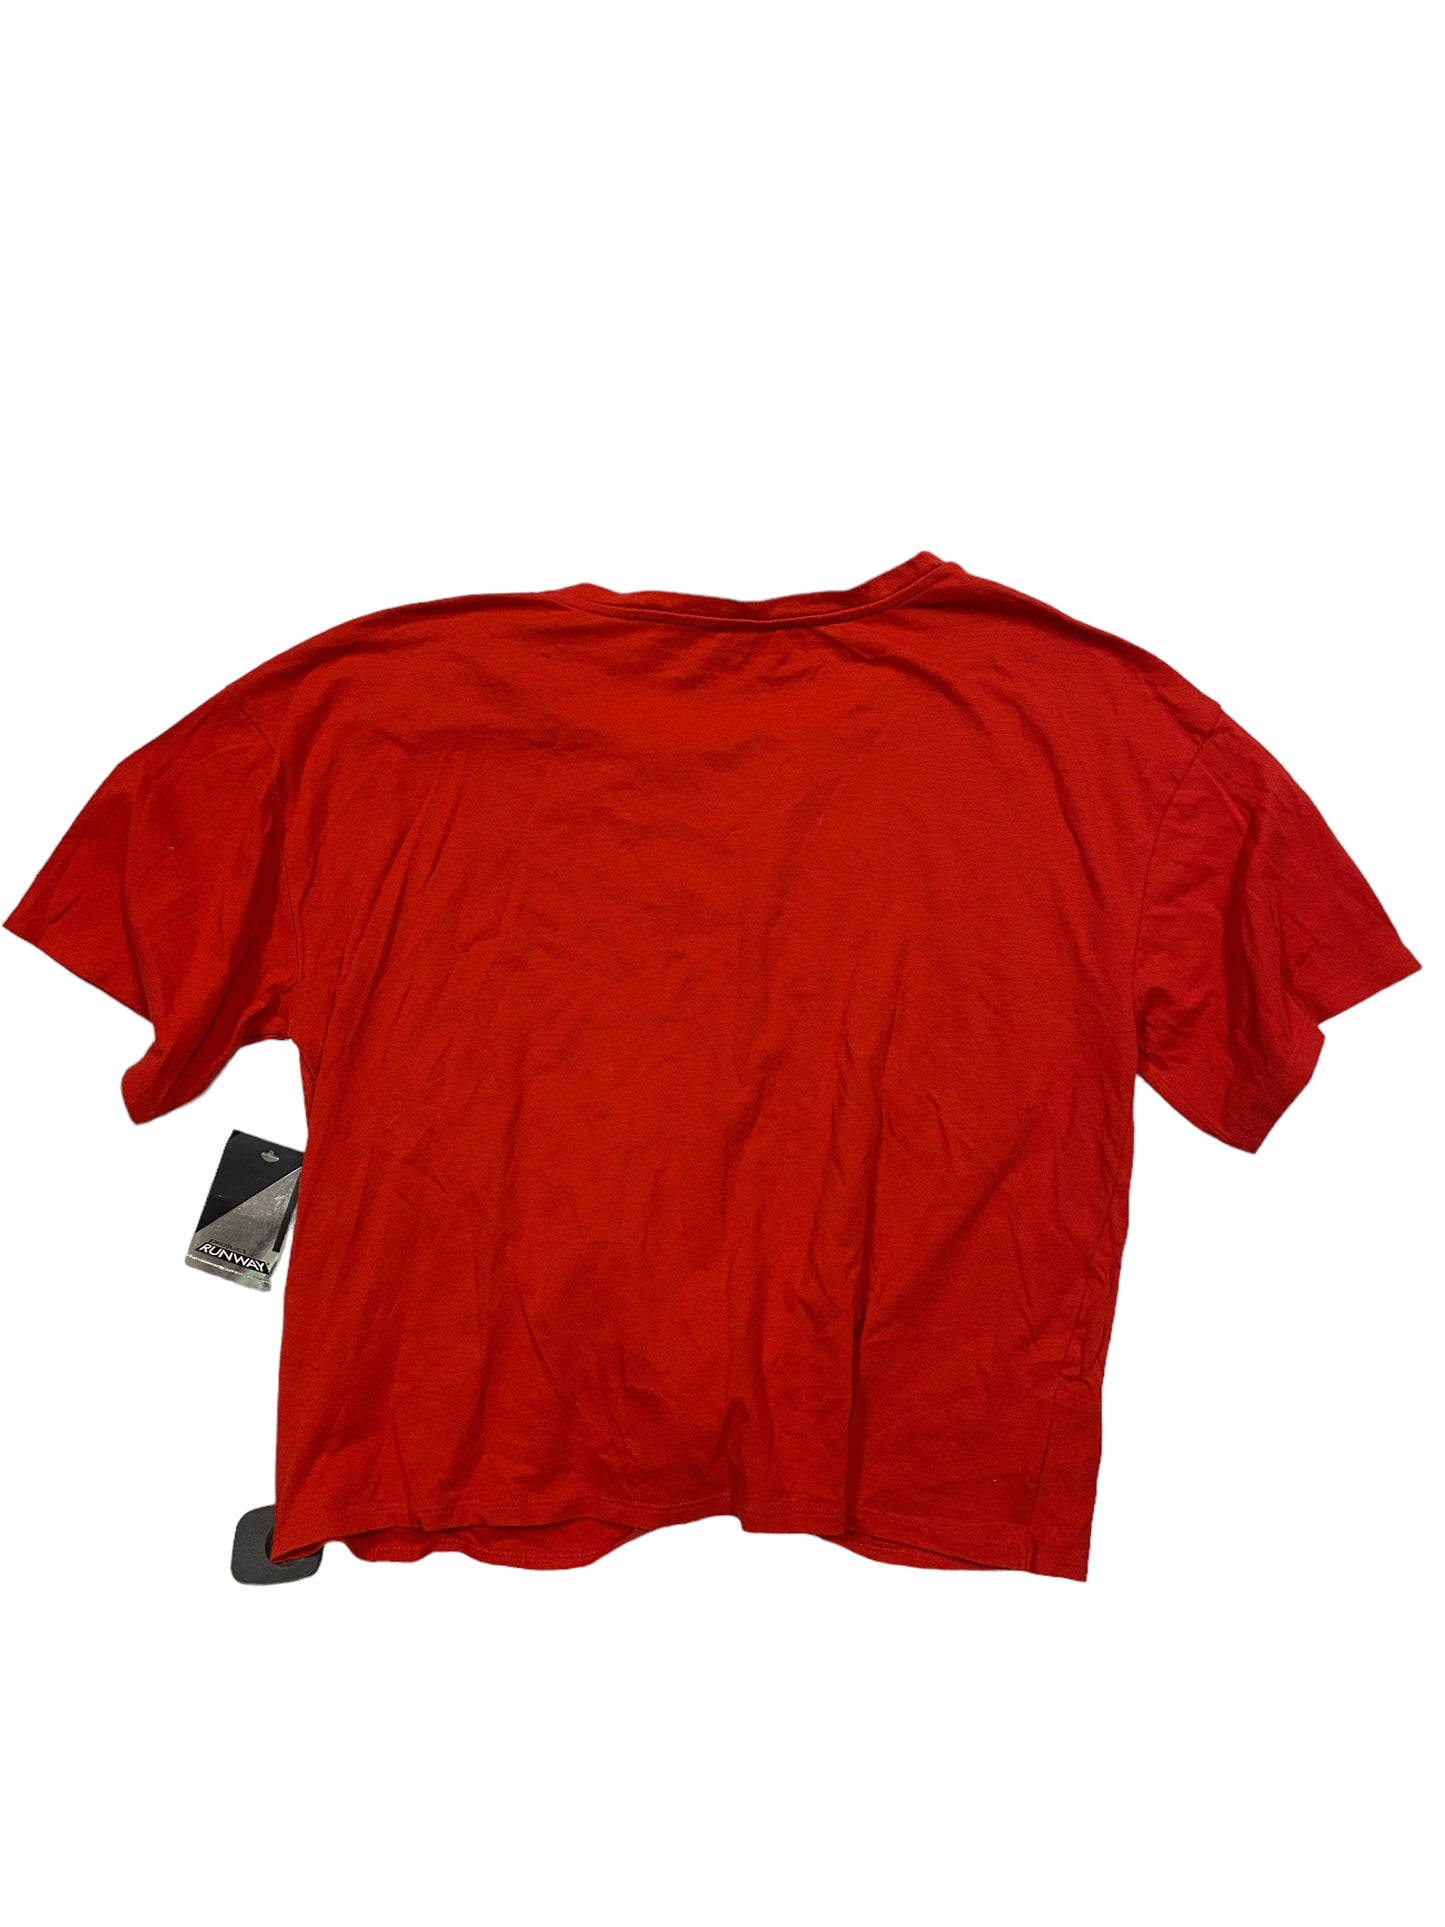 Red Top Short Sleeve Cmc, Size L